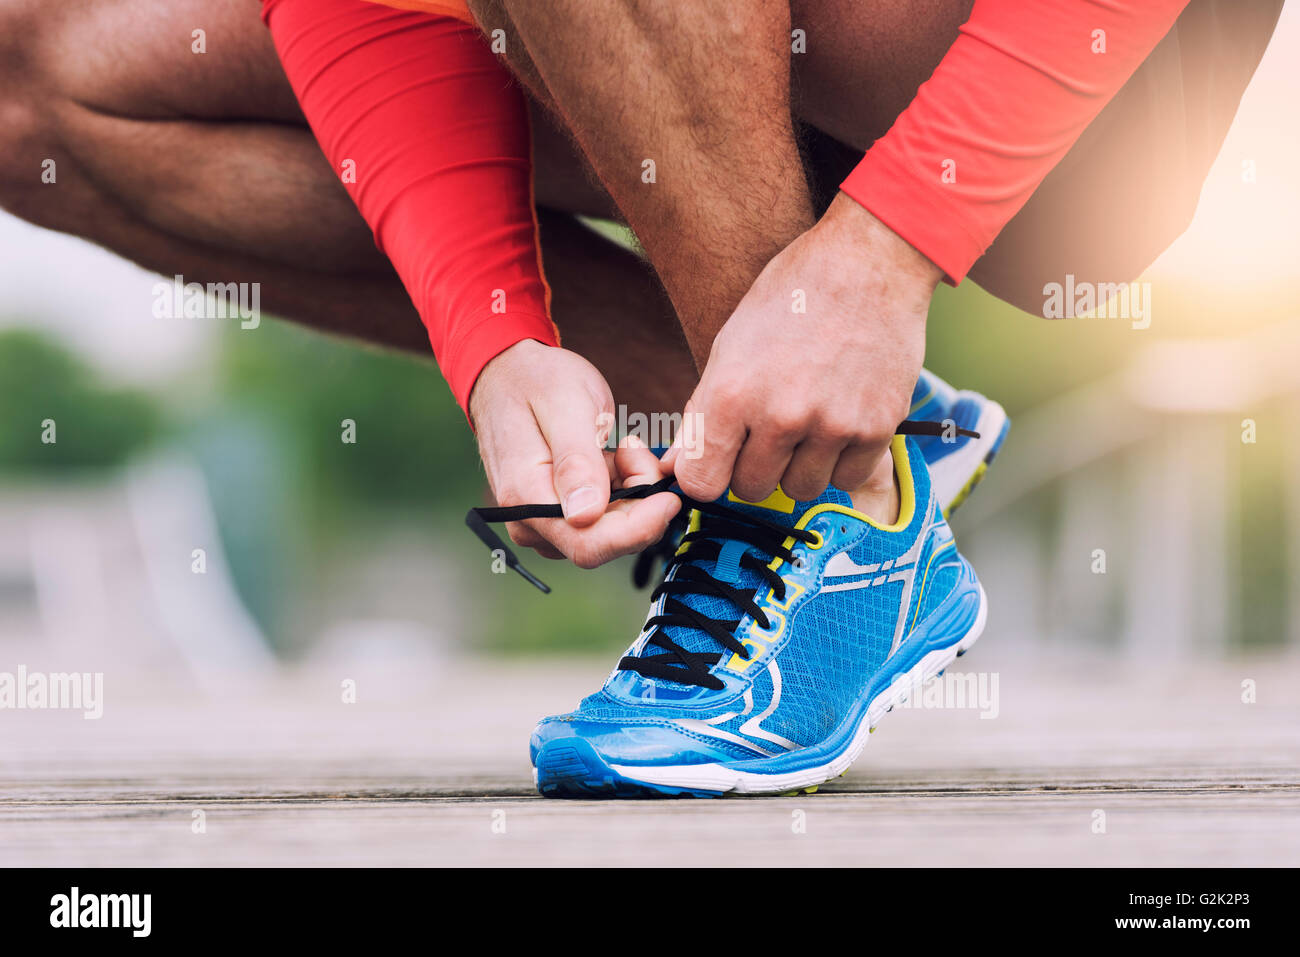 Runner tying his running shoes. City man shoelace sneakers Stock Photo